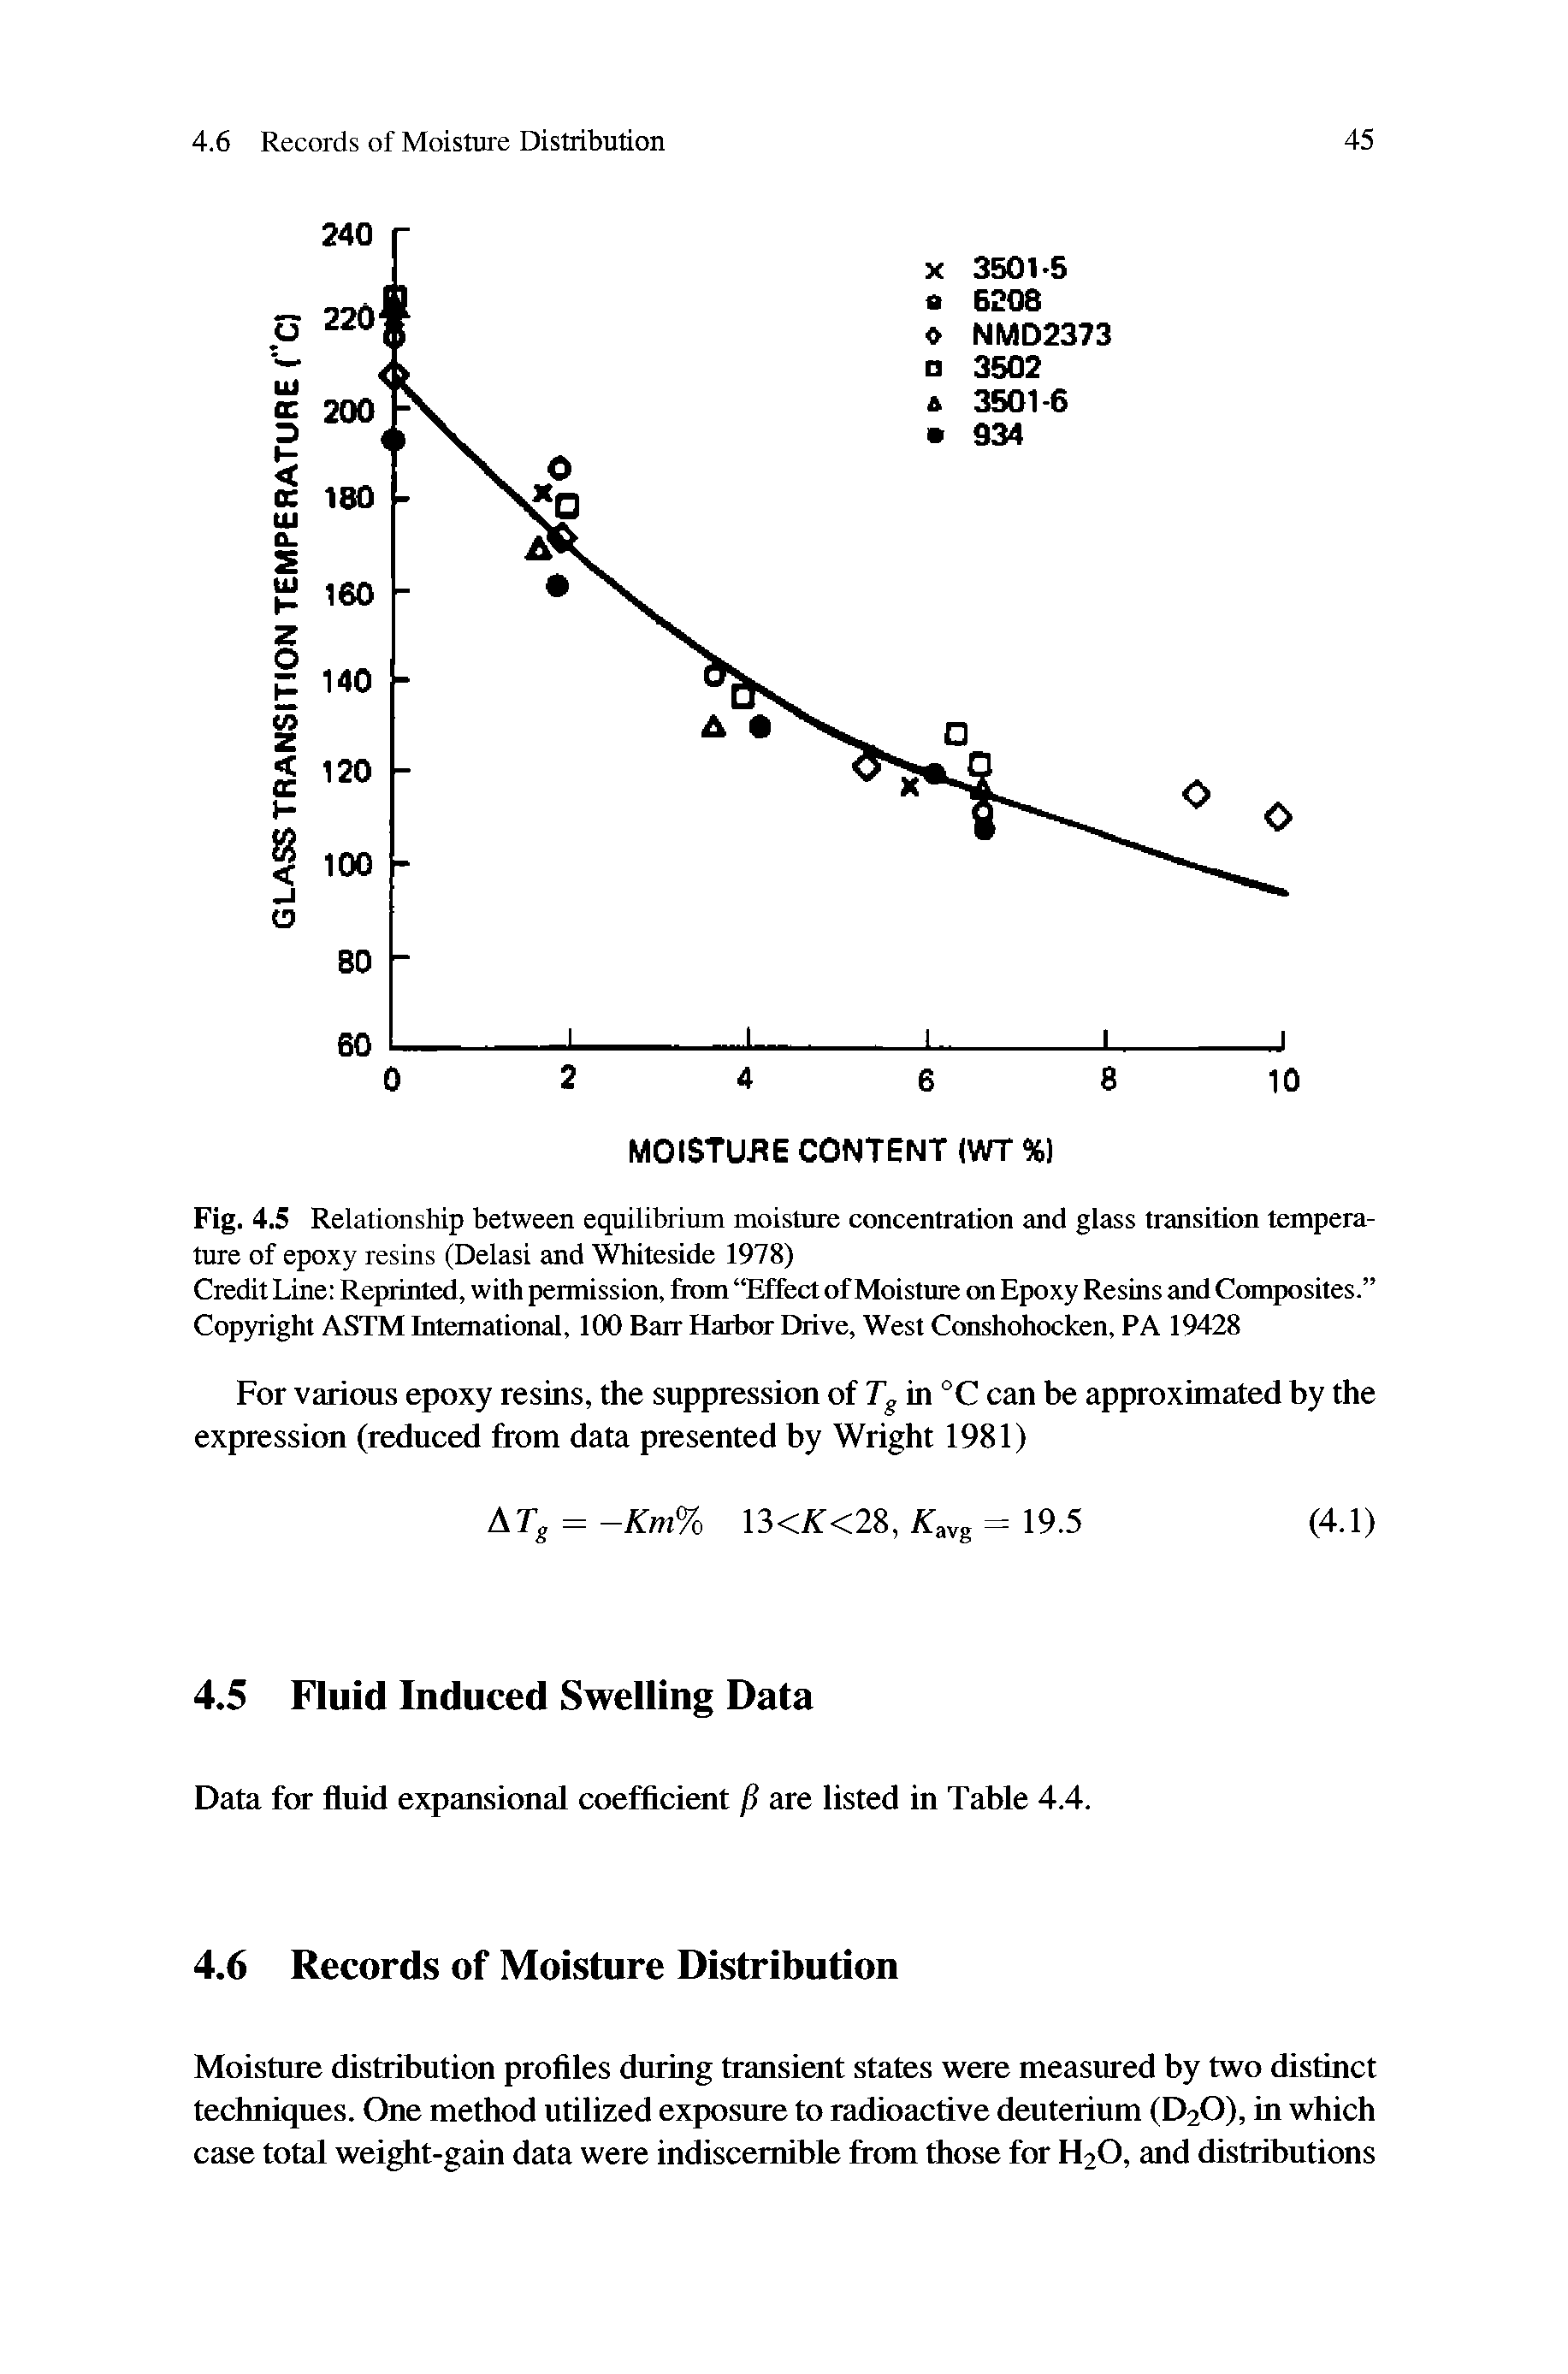 Fig. 4.5 Relationship between equilibrium moisture concentration and glass transition temperature of epoxy resins (Delasi and Whiteside 1978)...